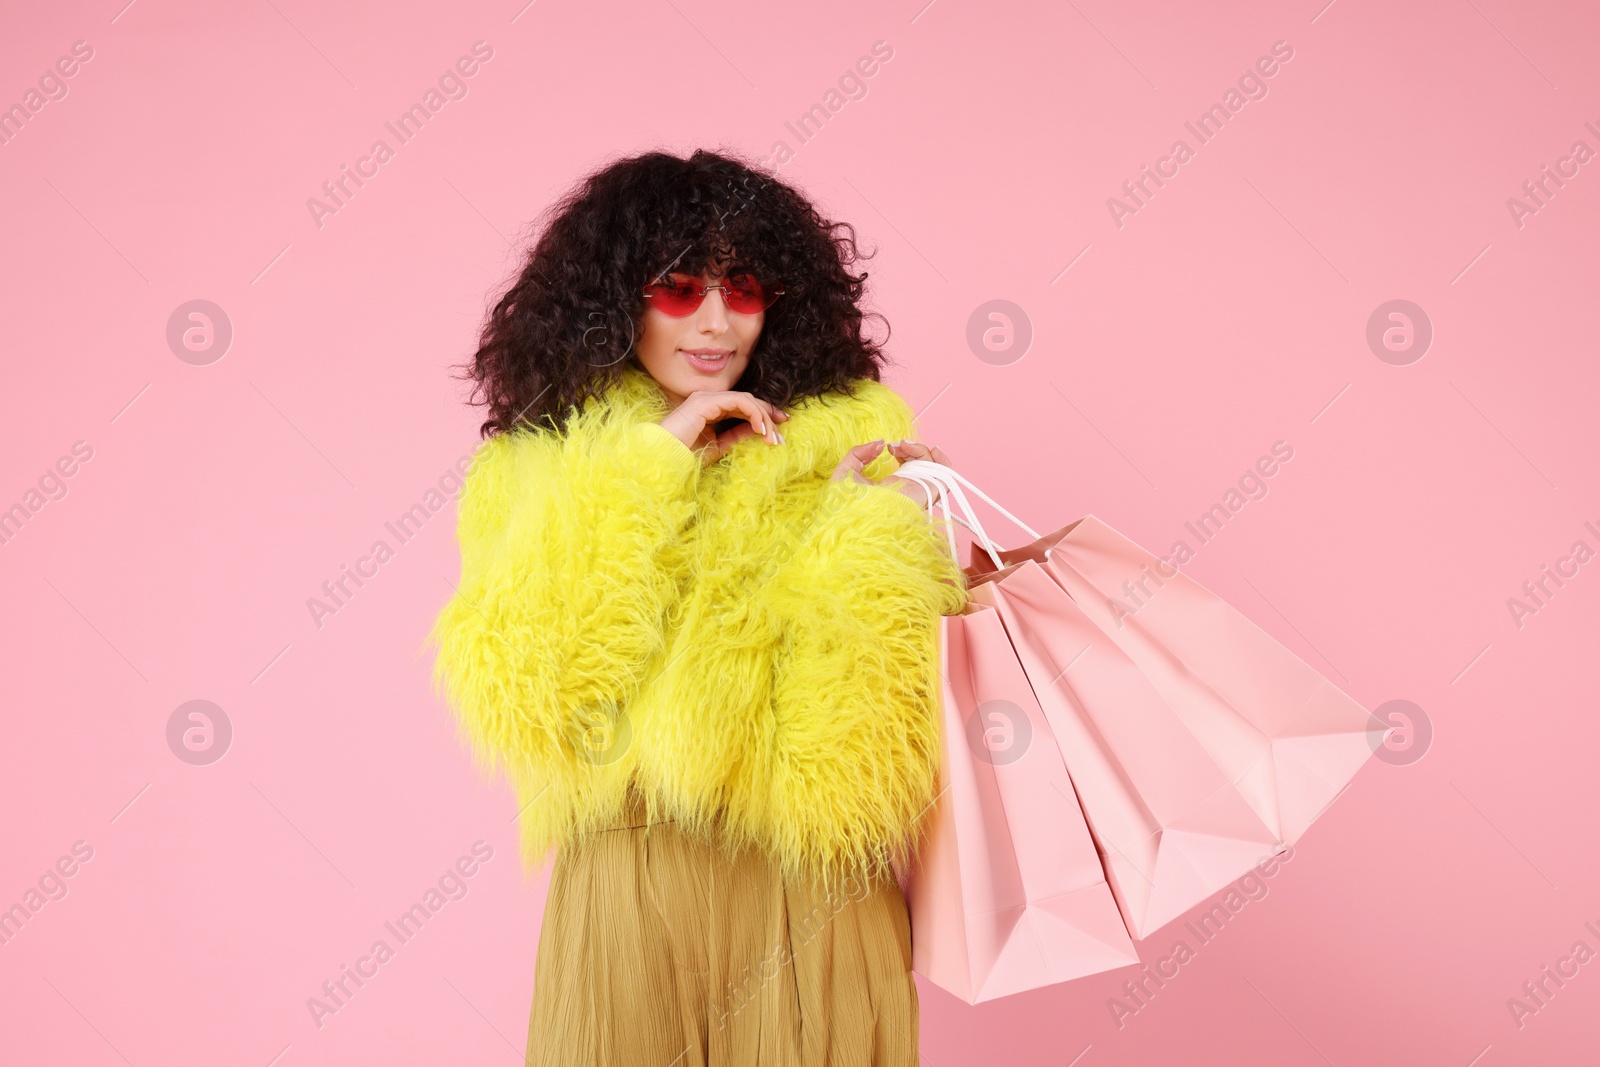 Photo of Happy young woman with shopping bags on pink background